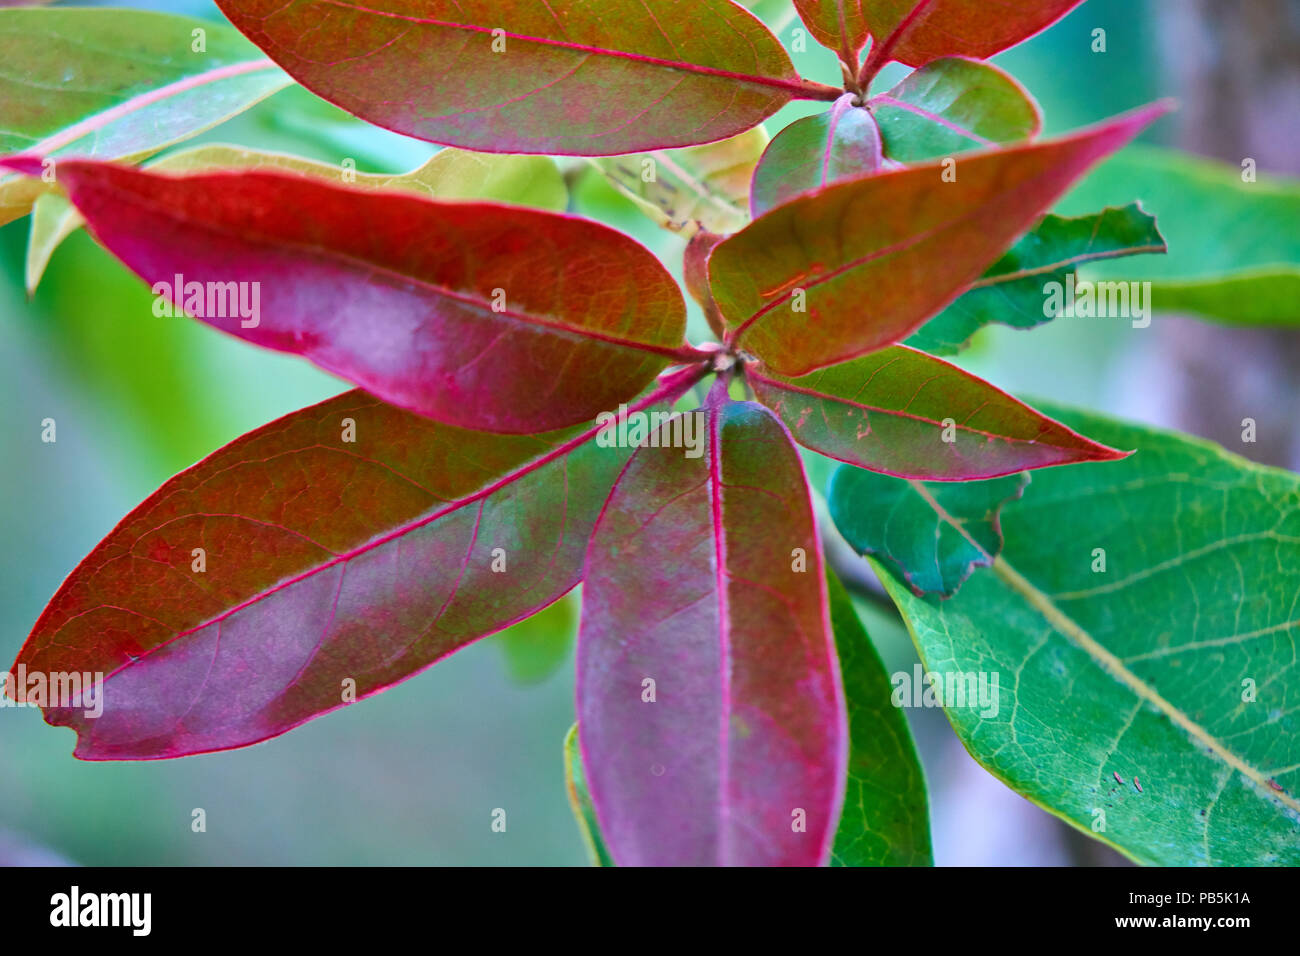 plant leaves changing seasons green to red Stock Photo